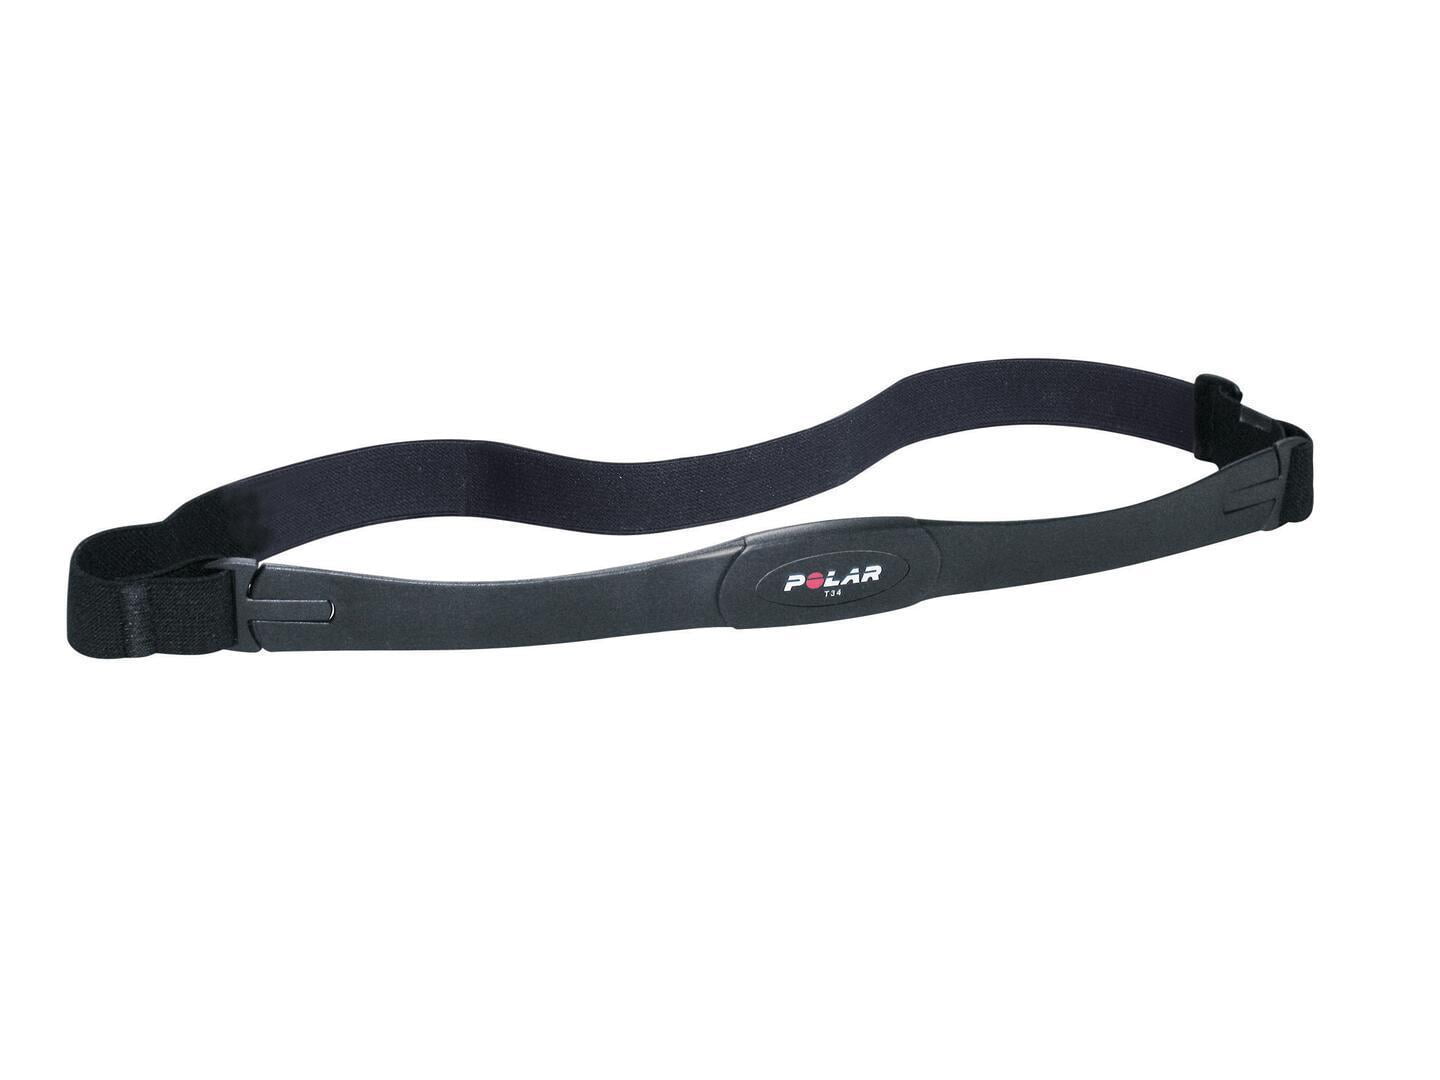 Two Polar T31 Coded Transmitter with Extra Small With Elastic Chest Strap 